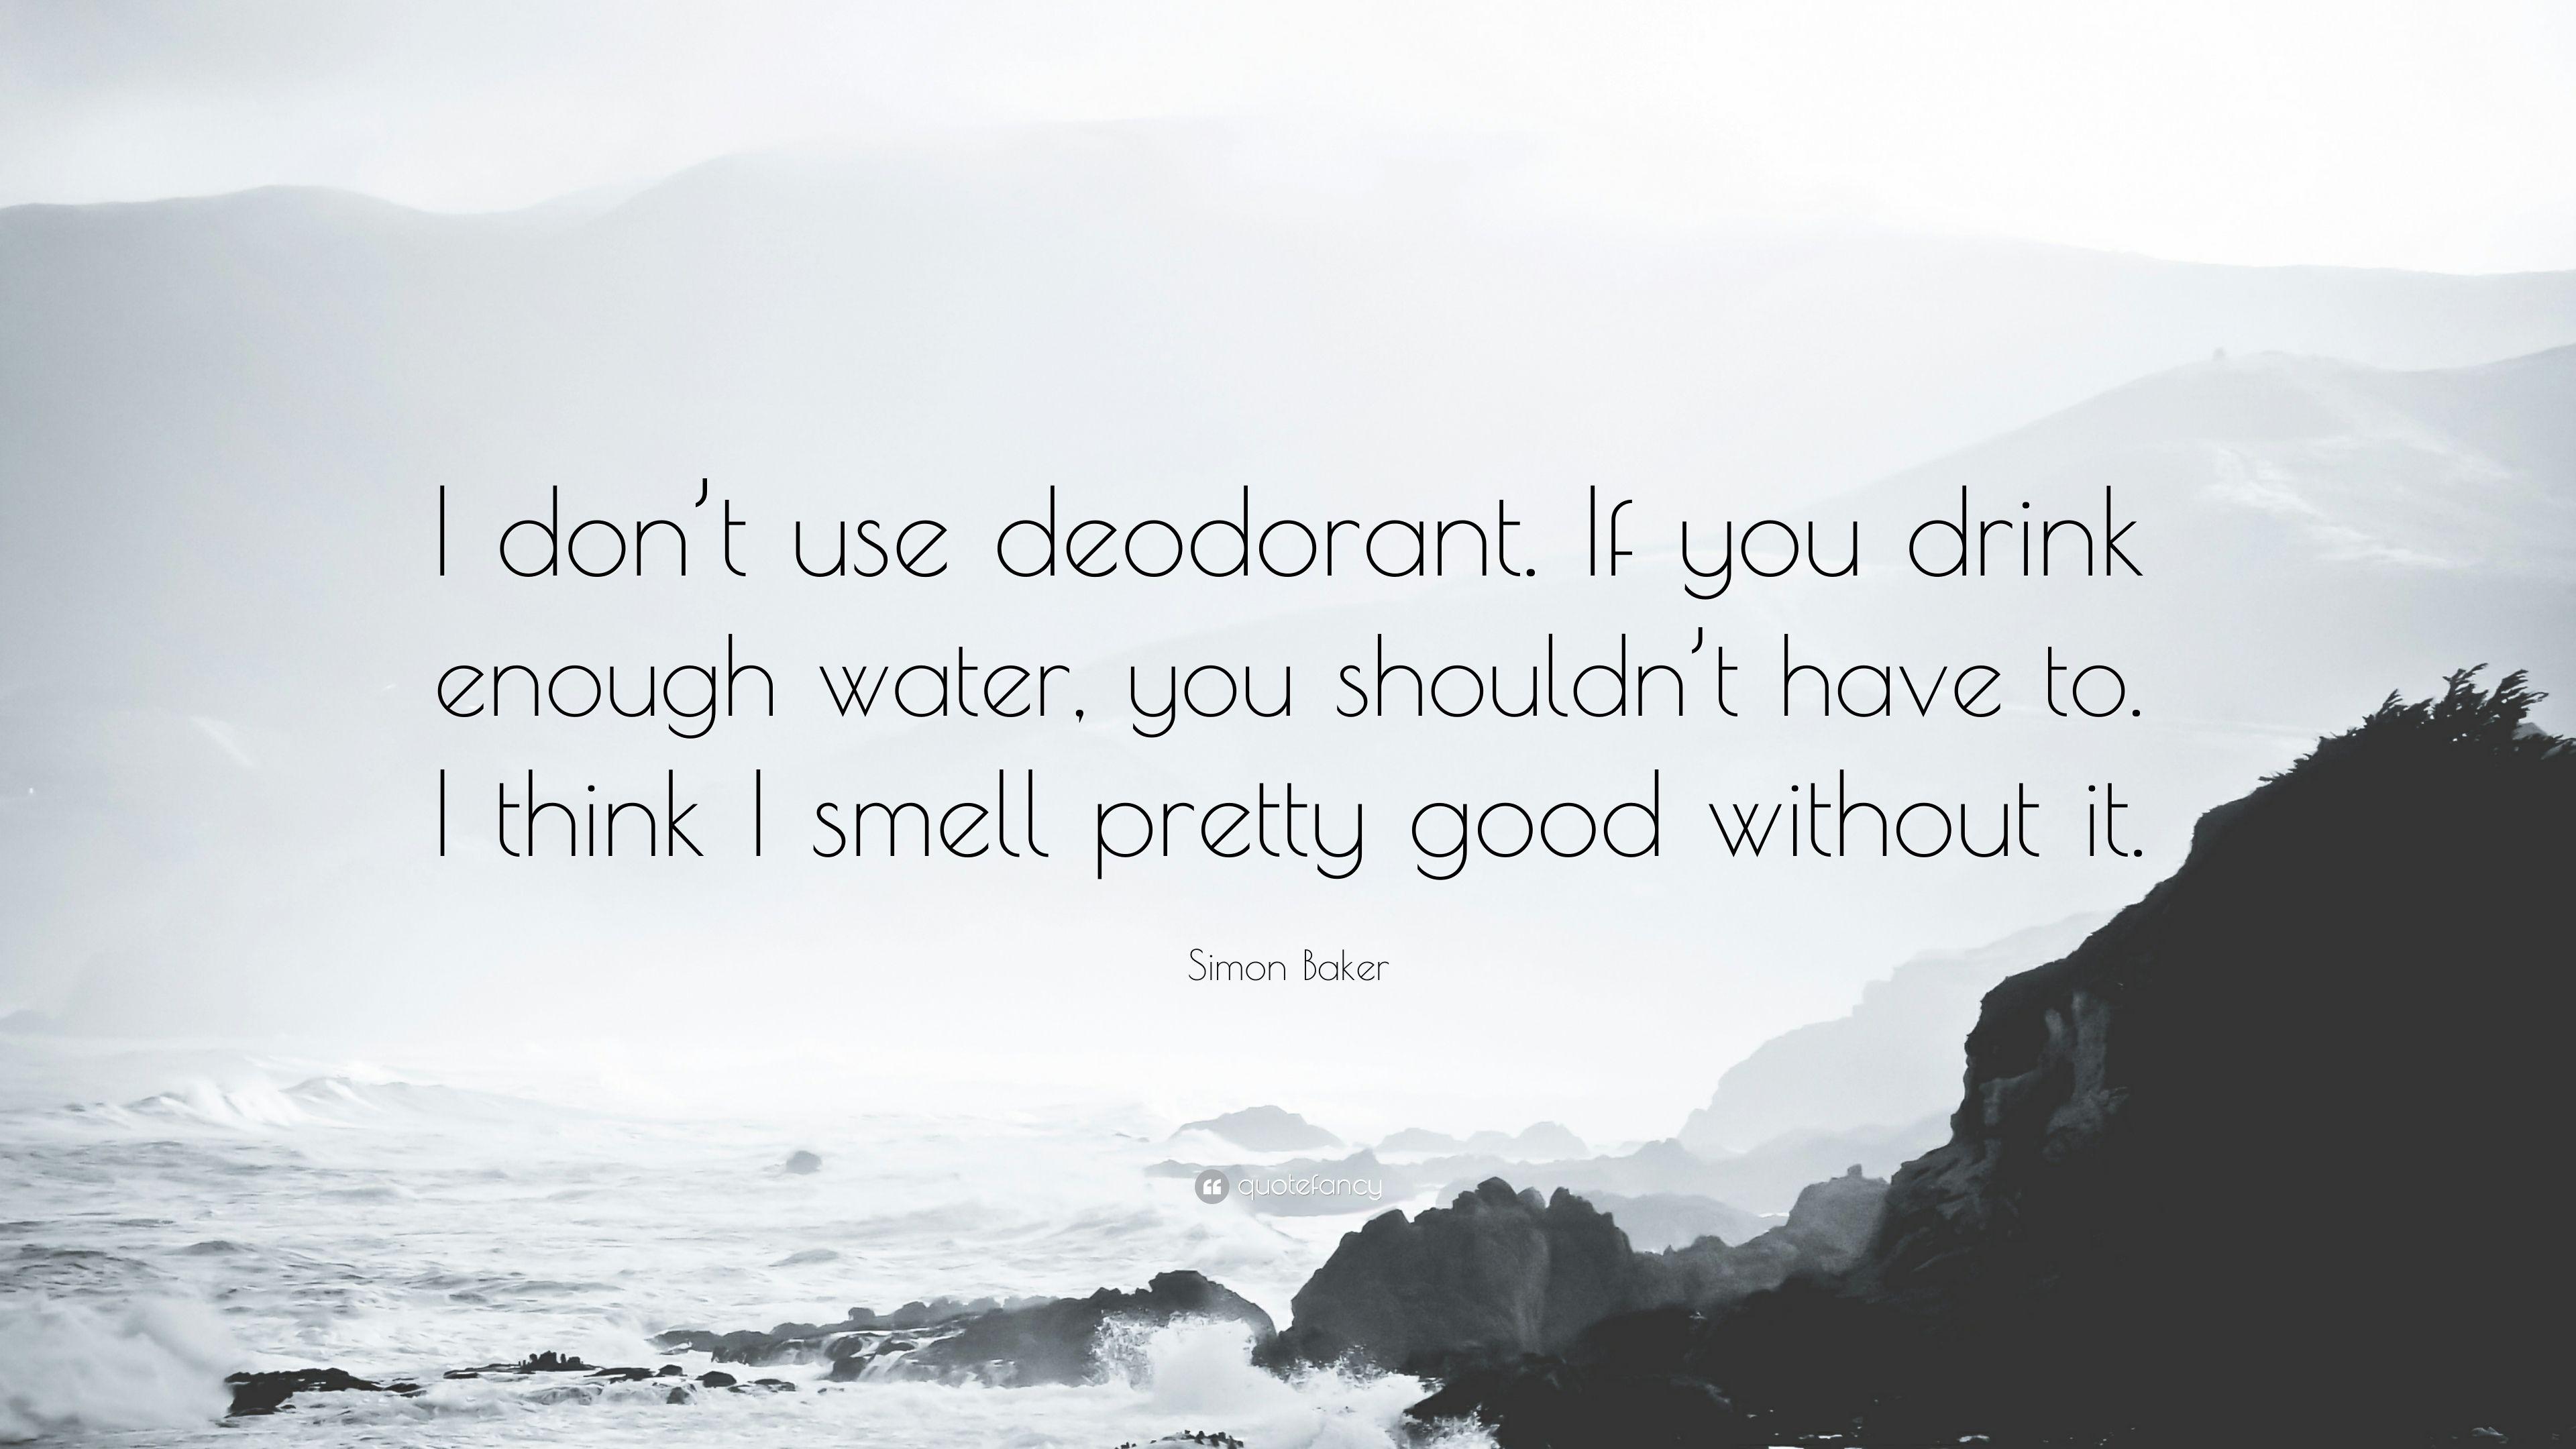 Simon Baker Quote: “I don't use deodorant. If you drink enough water